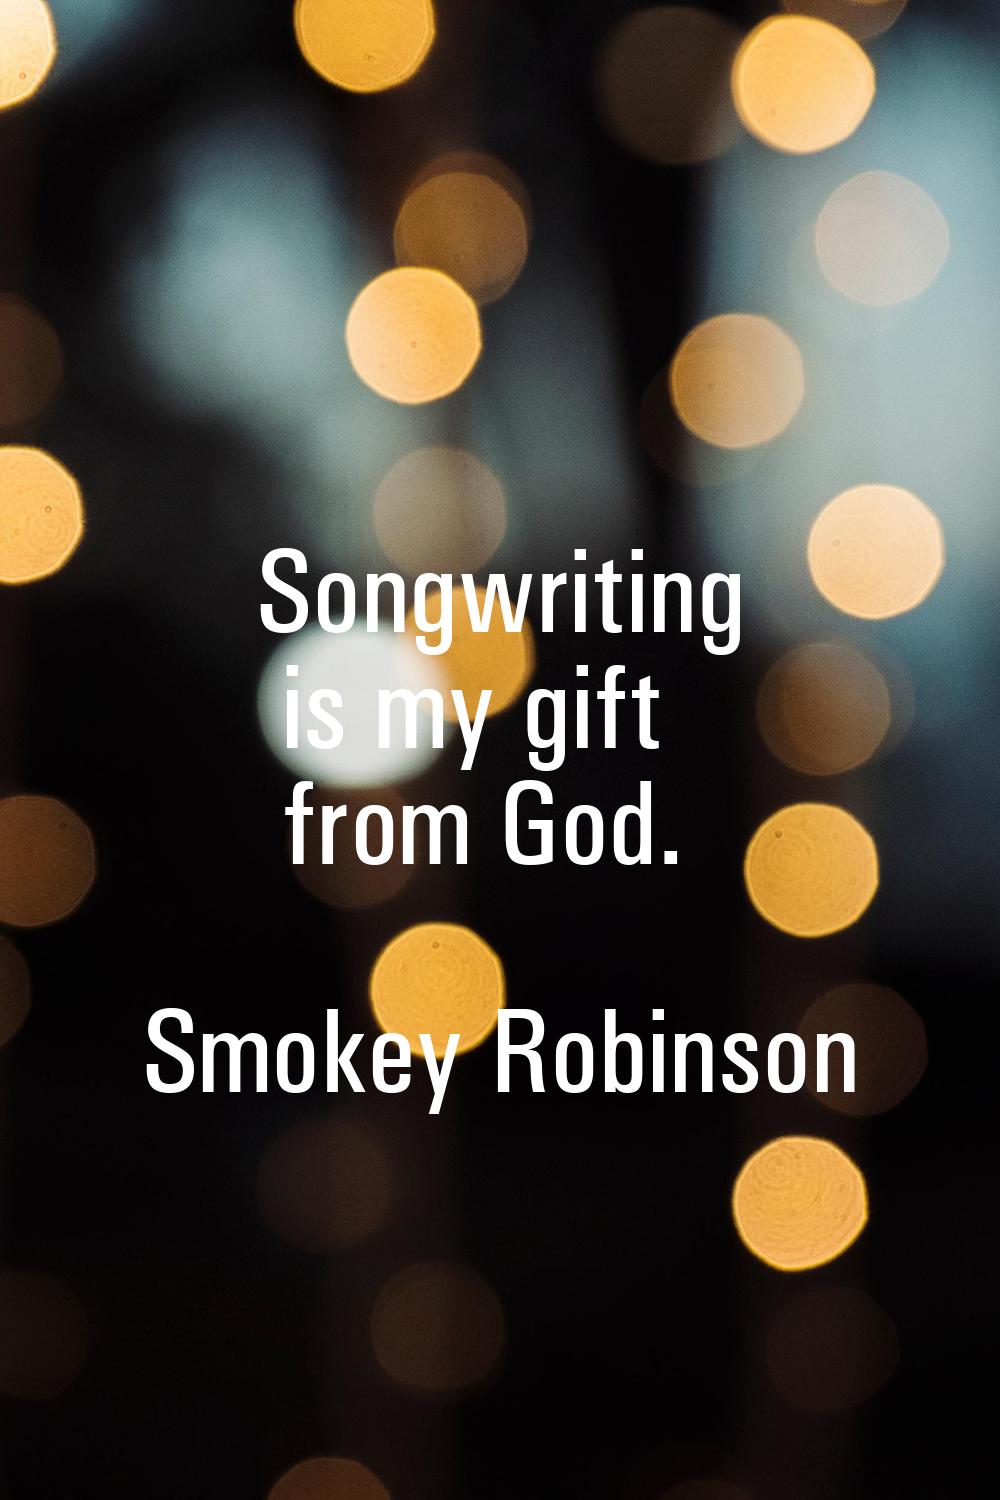 Songwriting is my gift from God.